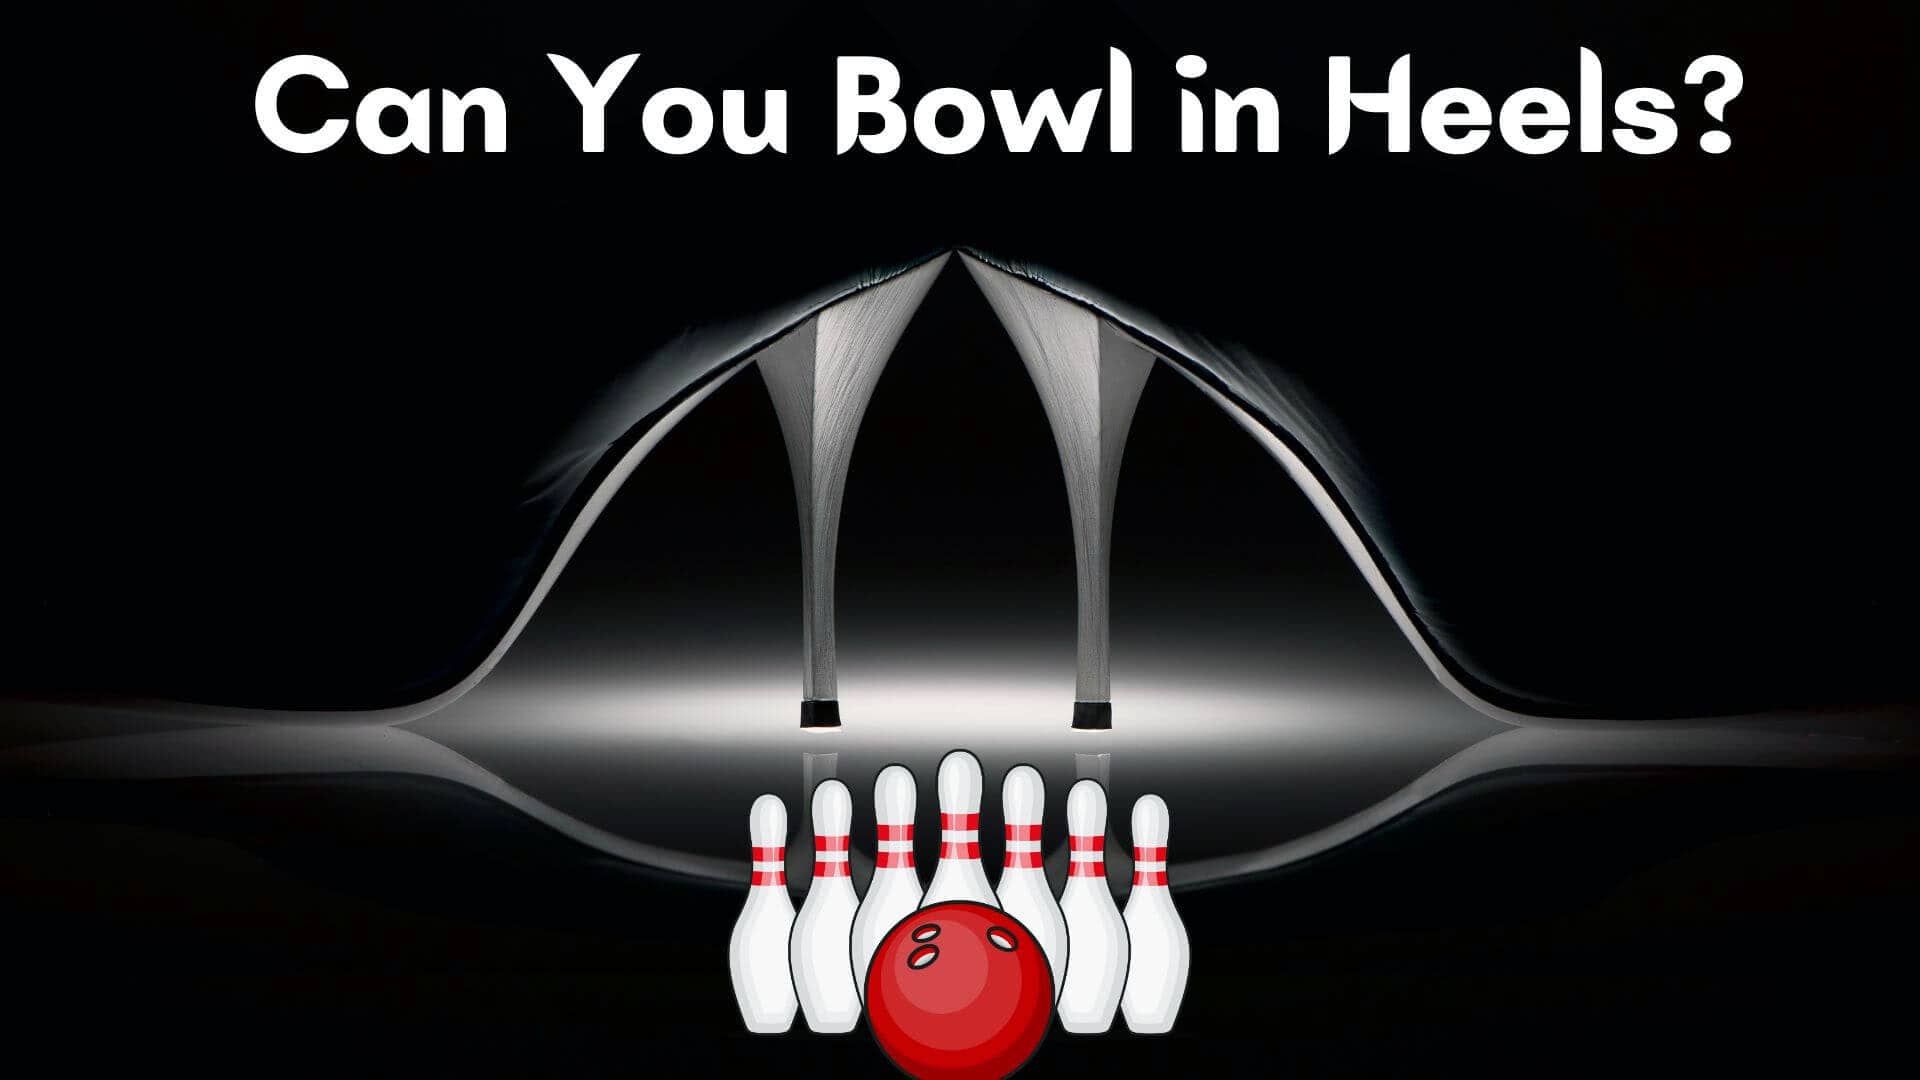 Can You Bowl in Heels?